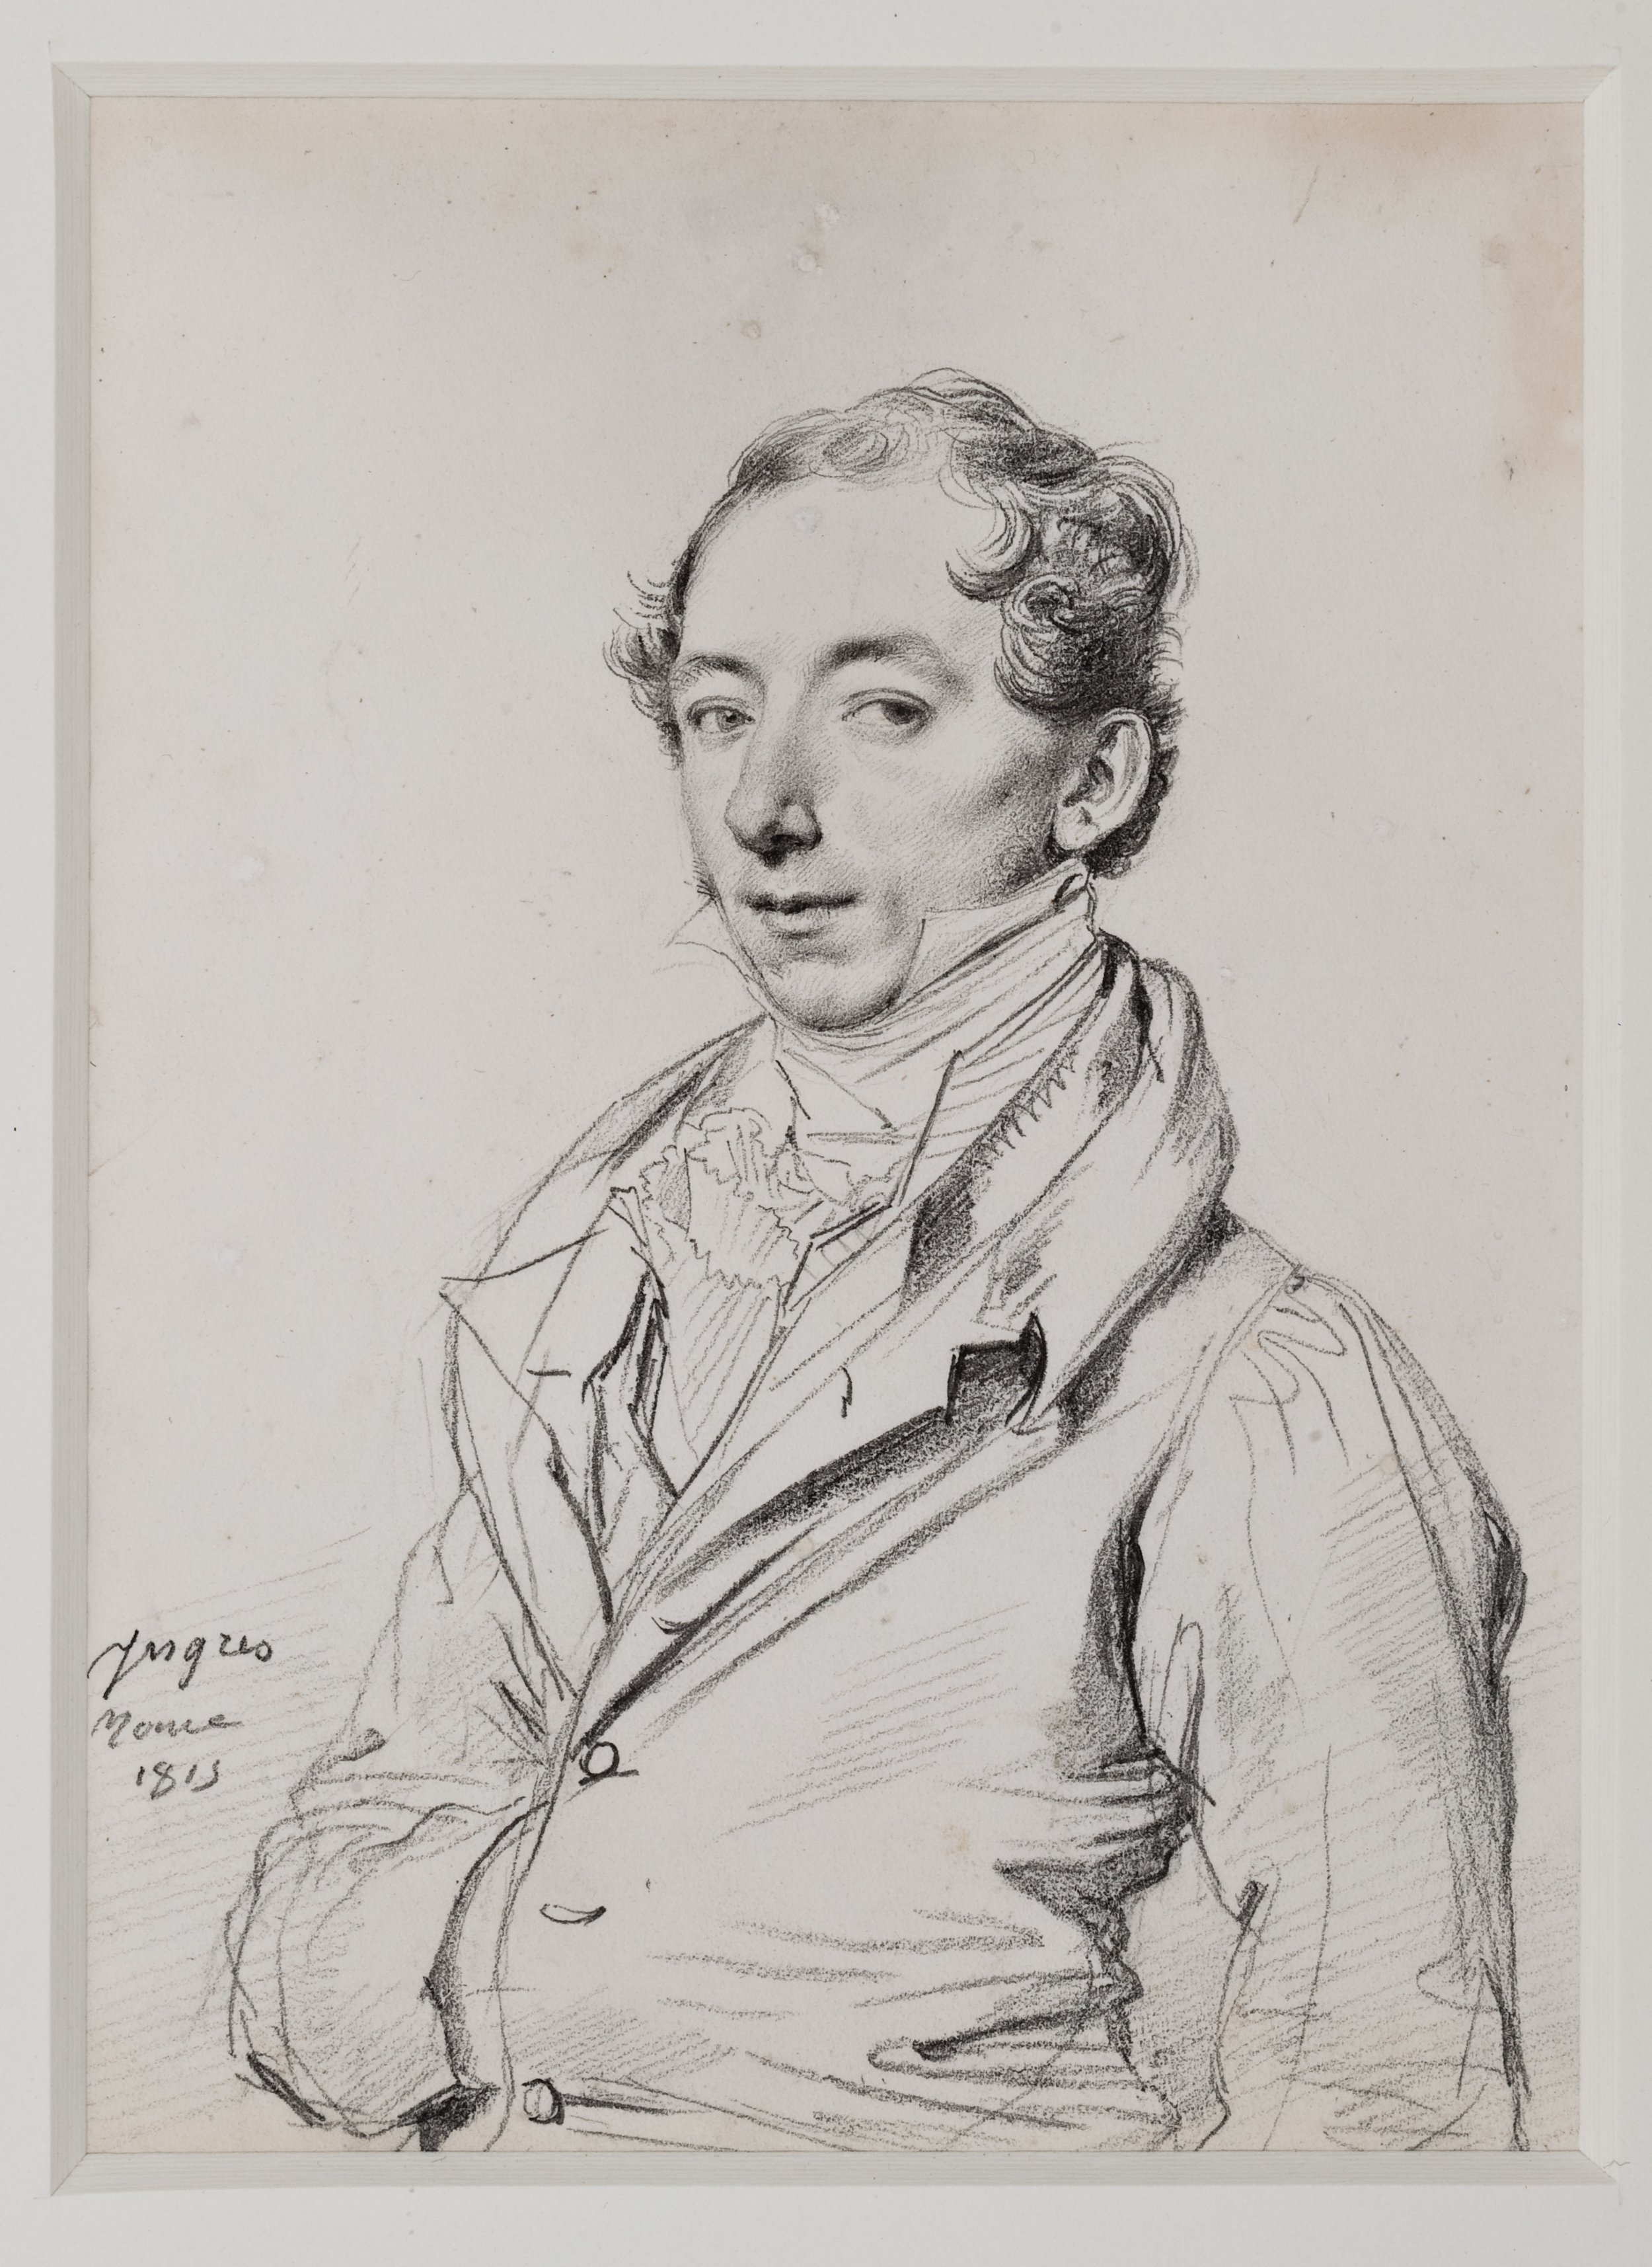   Jean-Auguste-Dominique Ingres  France, 1780–1867  Portrait of the Honorable Frederick Sylvester North Douglas, Son of Lord and Lady Glenbervie , 1815 graphite on paper, 8 1/4 x 6 1/4 inches The Joan Whitney Payson Collection at the Portland Museum 